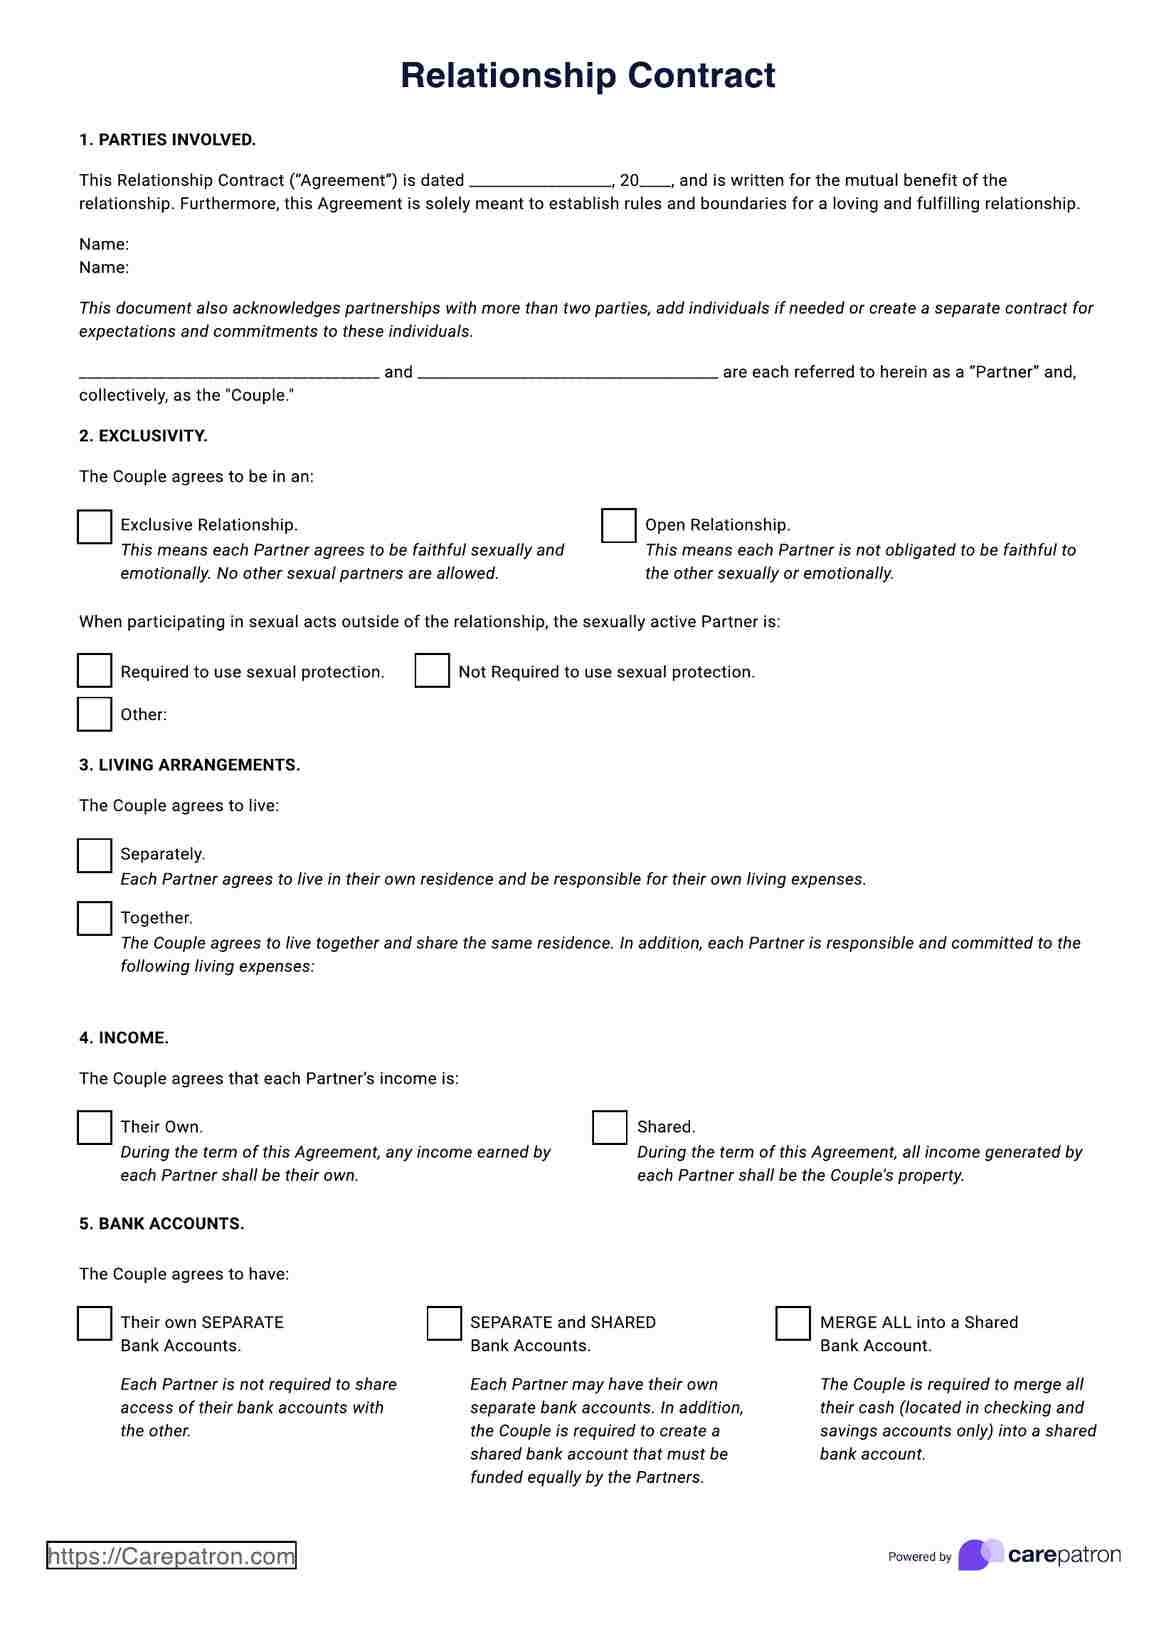 Relationship Contract PDF Example